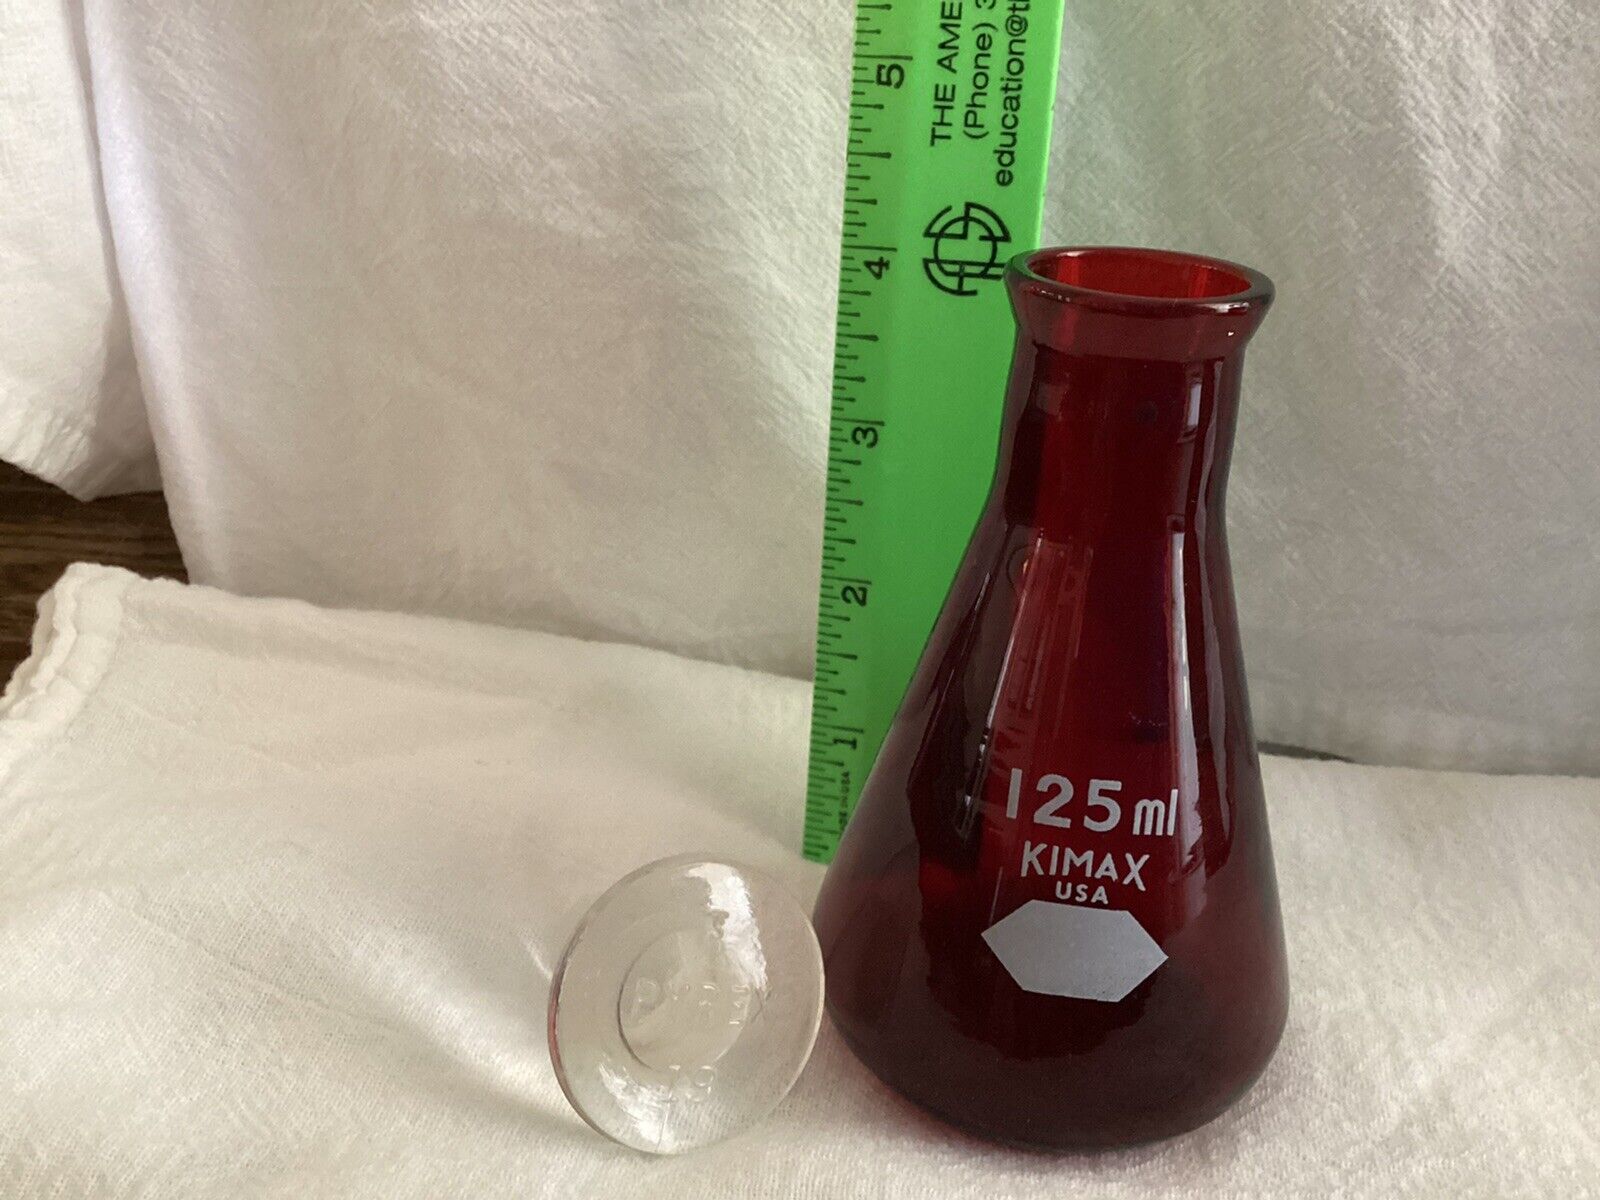 Vintage Kimax Erlenmeyer Flask, 125 ml Capacity & Pyrex Stopper. Rare Red Color